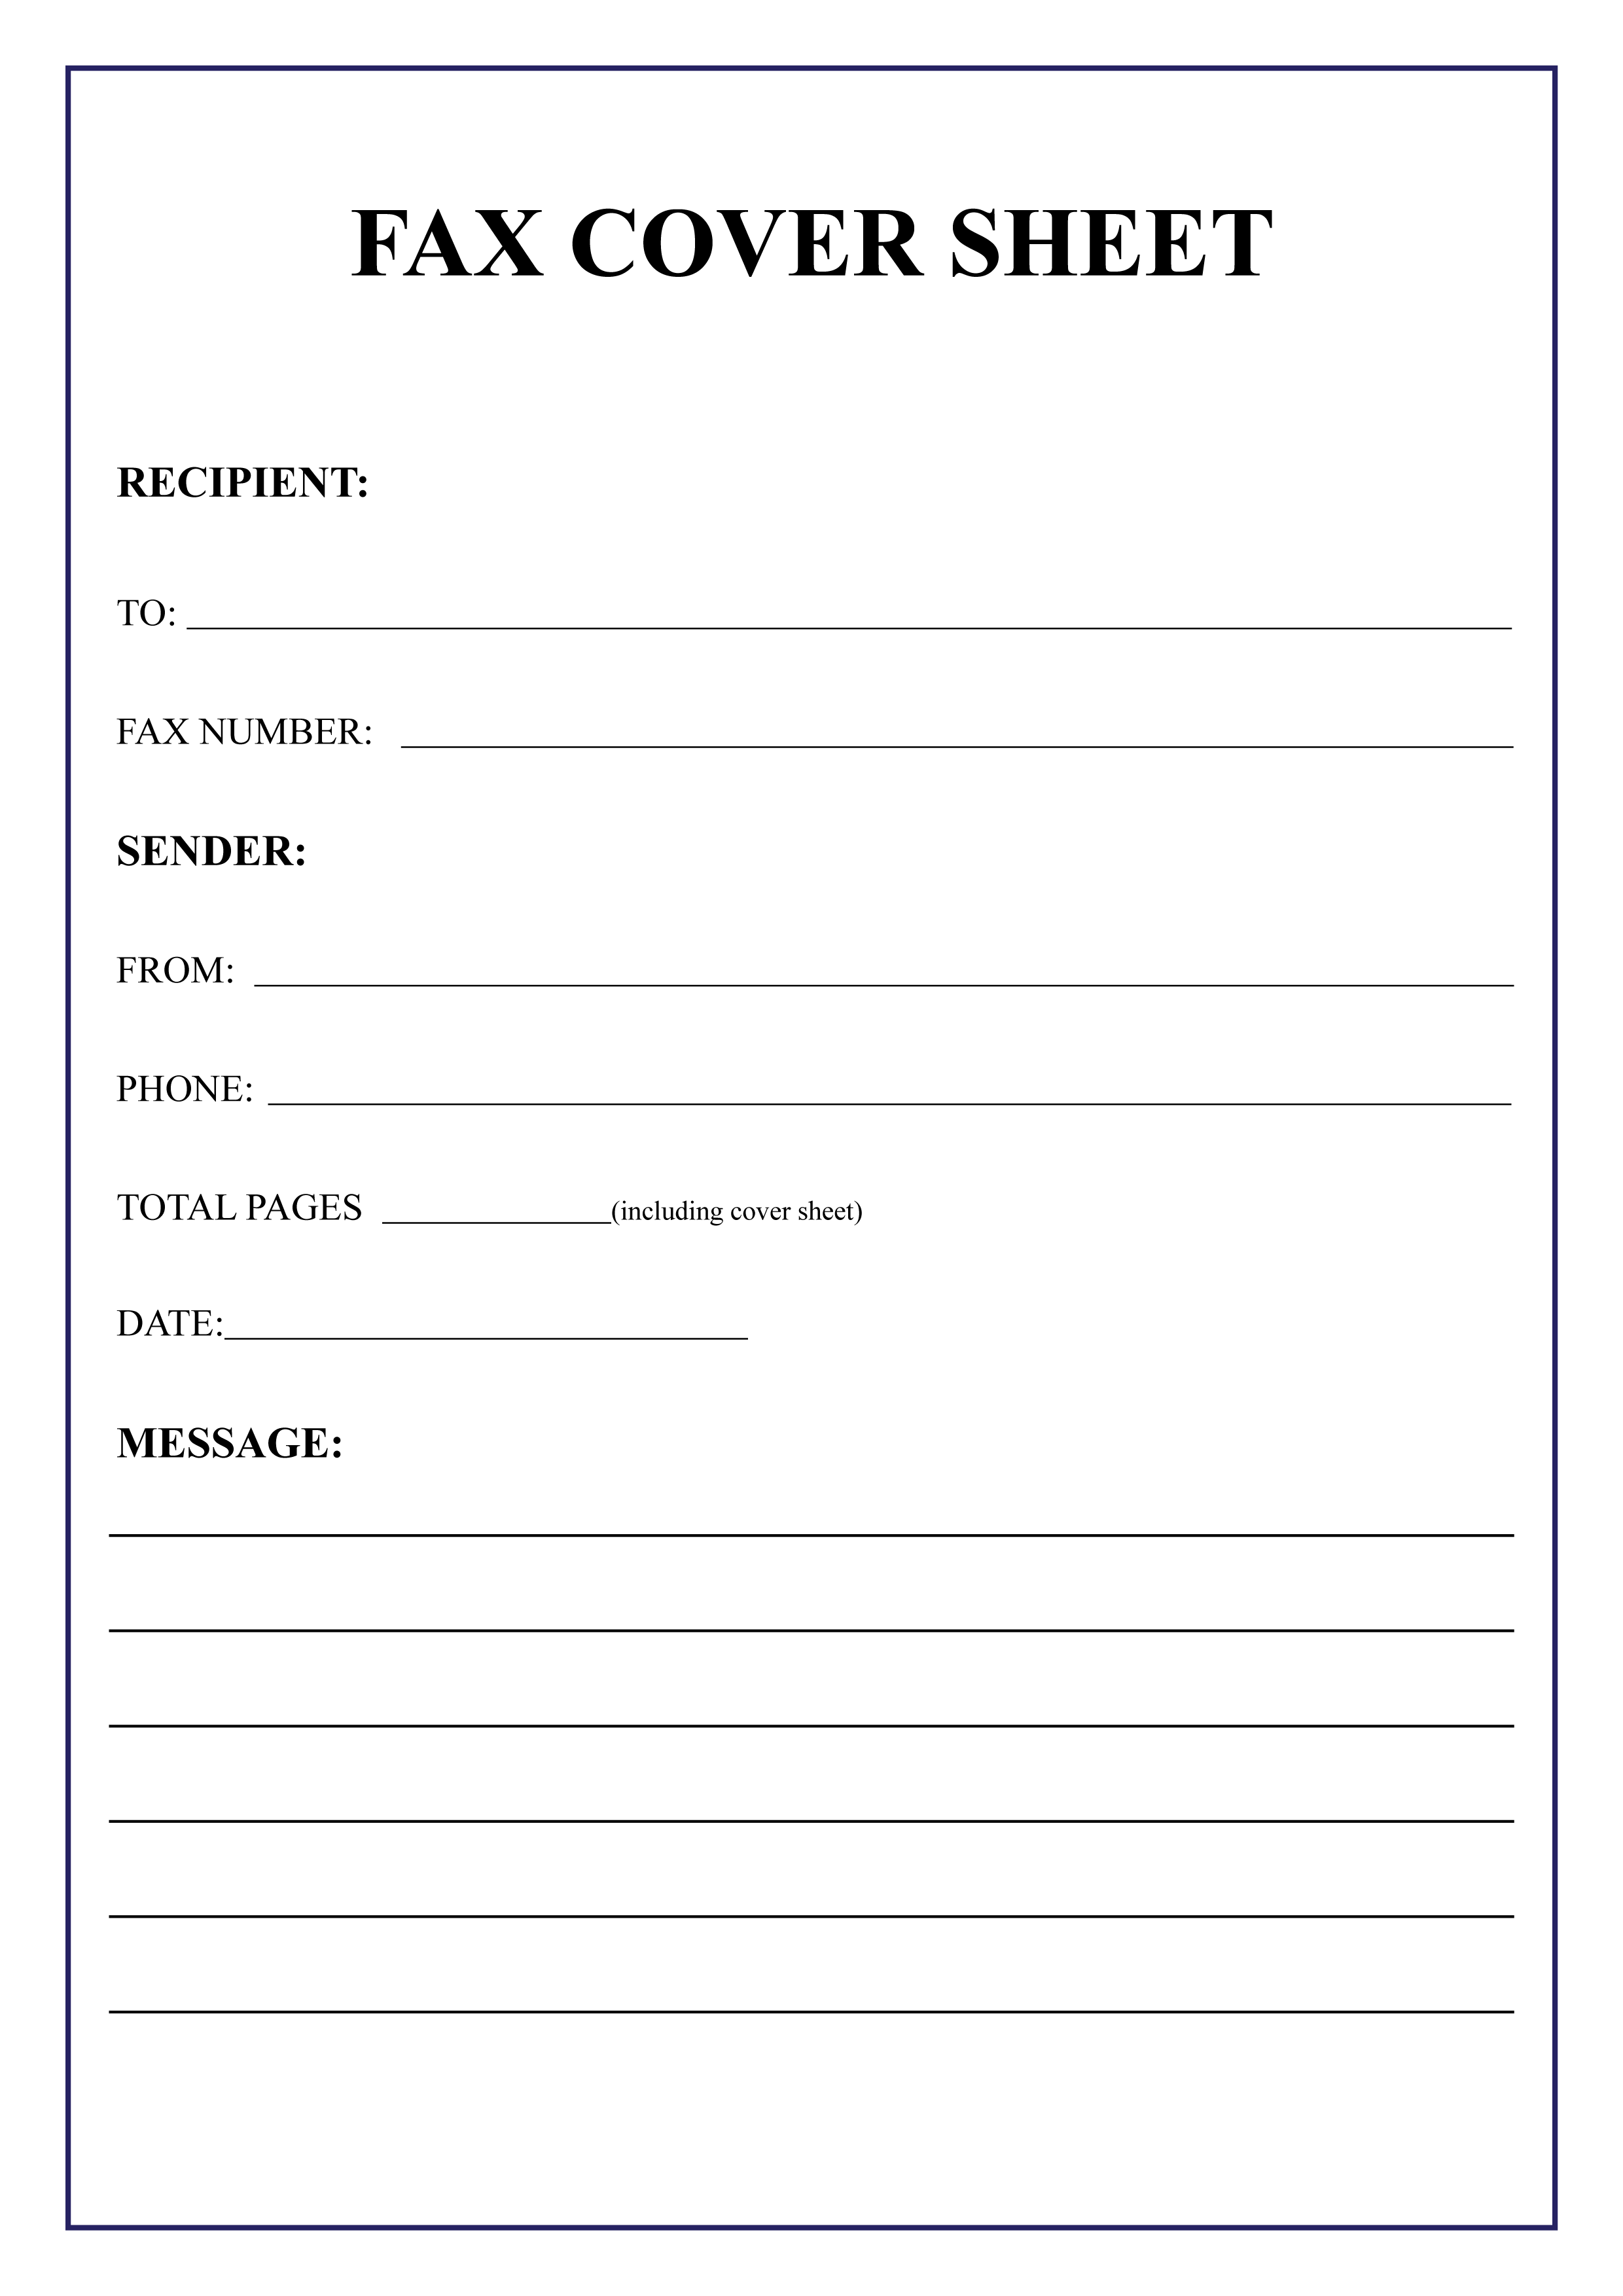 Confidential Fax Cover Sheet Template Fax Cover Sheet Template